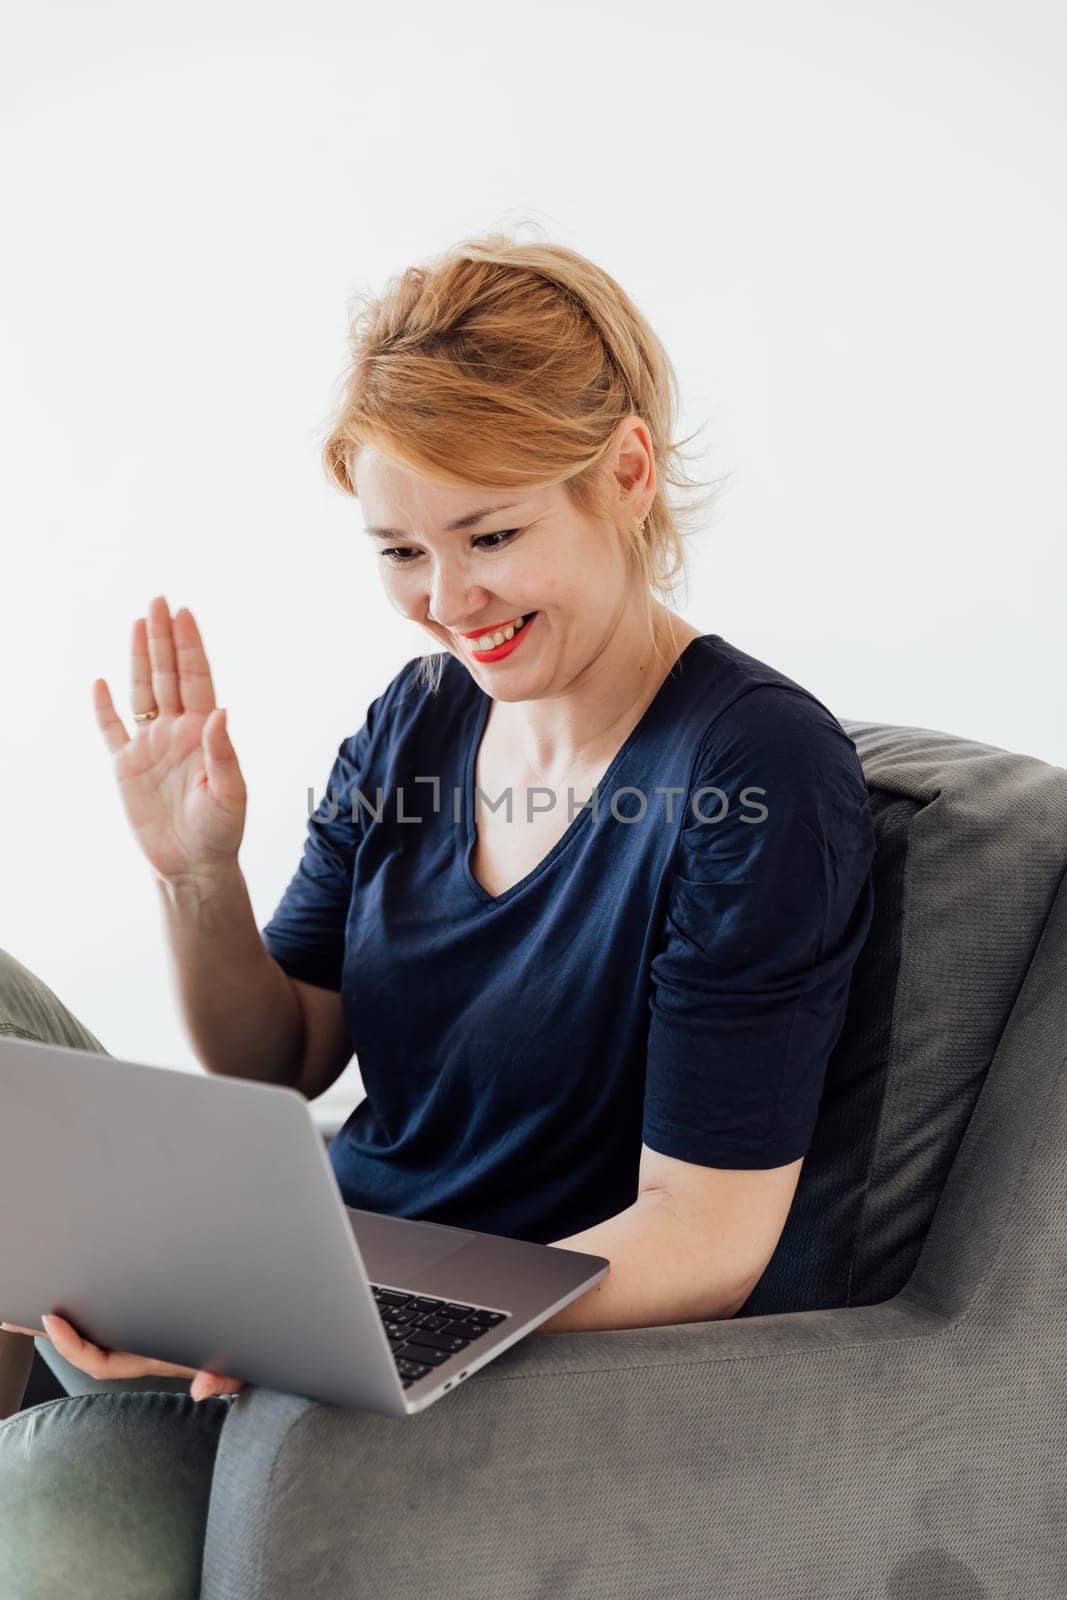 woman working online on computer at home